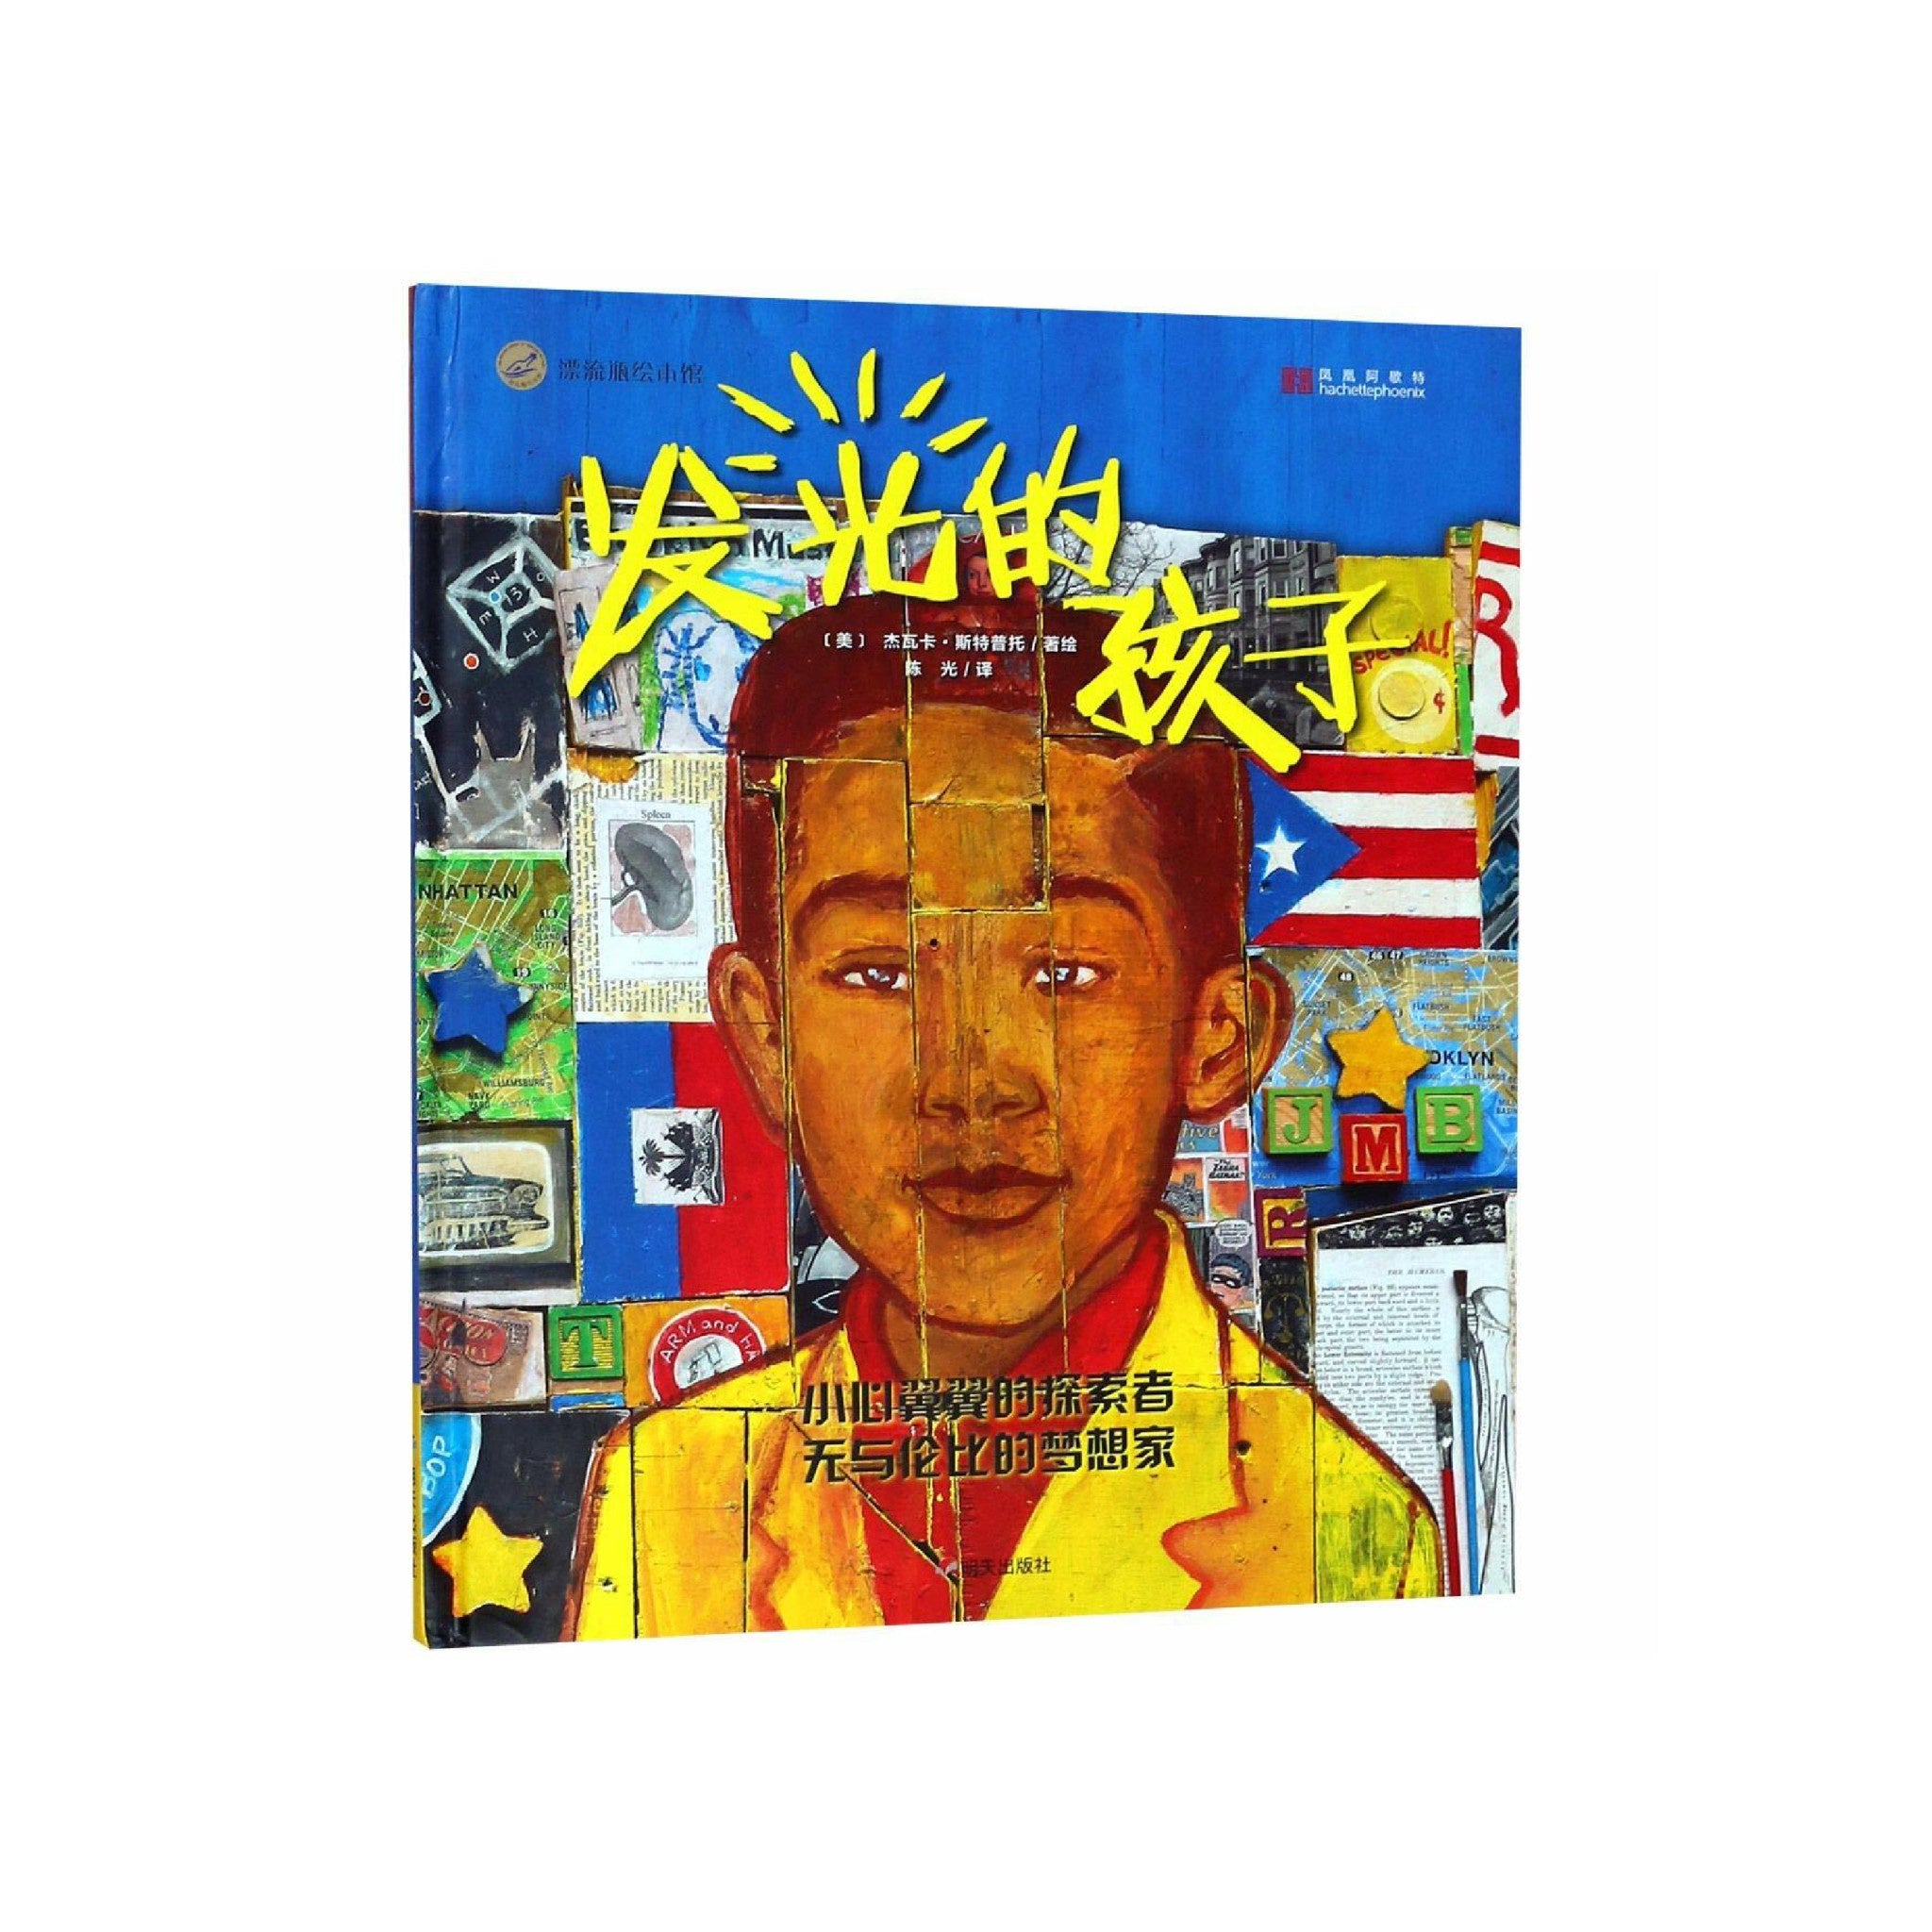 Radiant Child: The Story of Young Artist Jean-Michel Basquiat - Wynwood Walls Shop